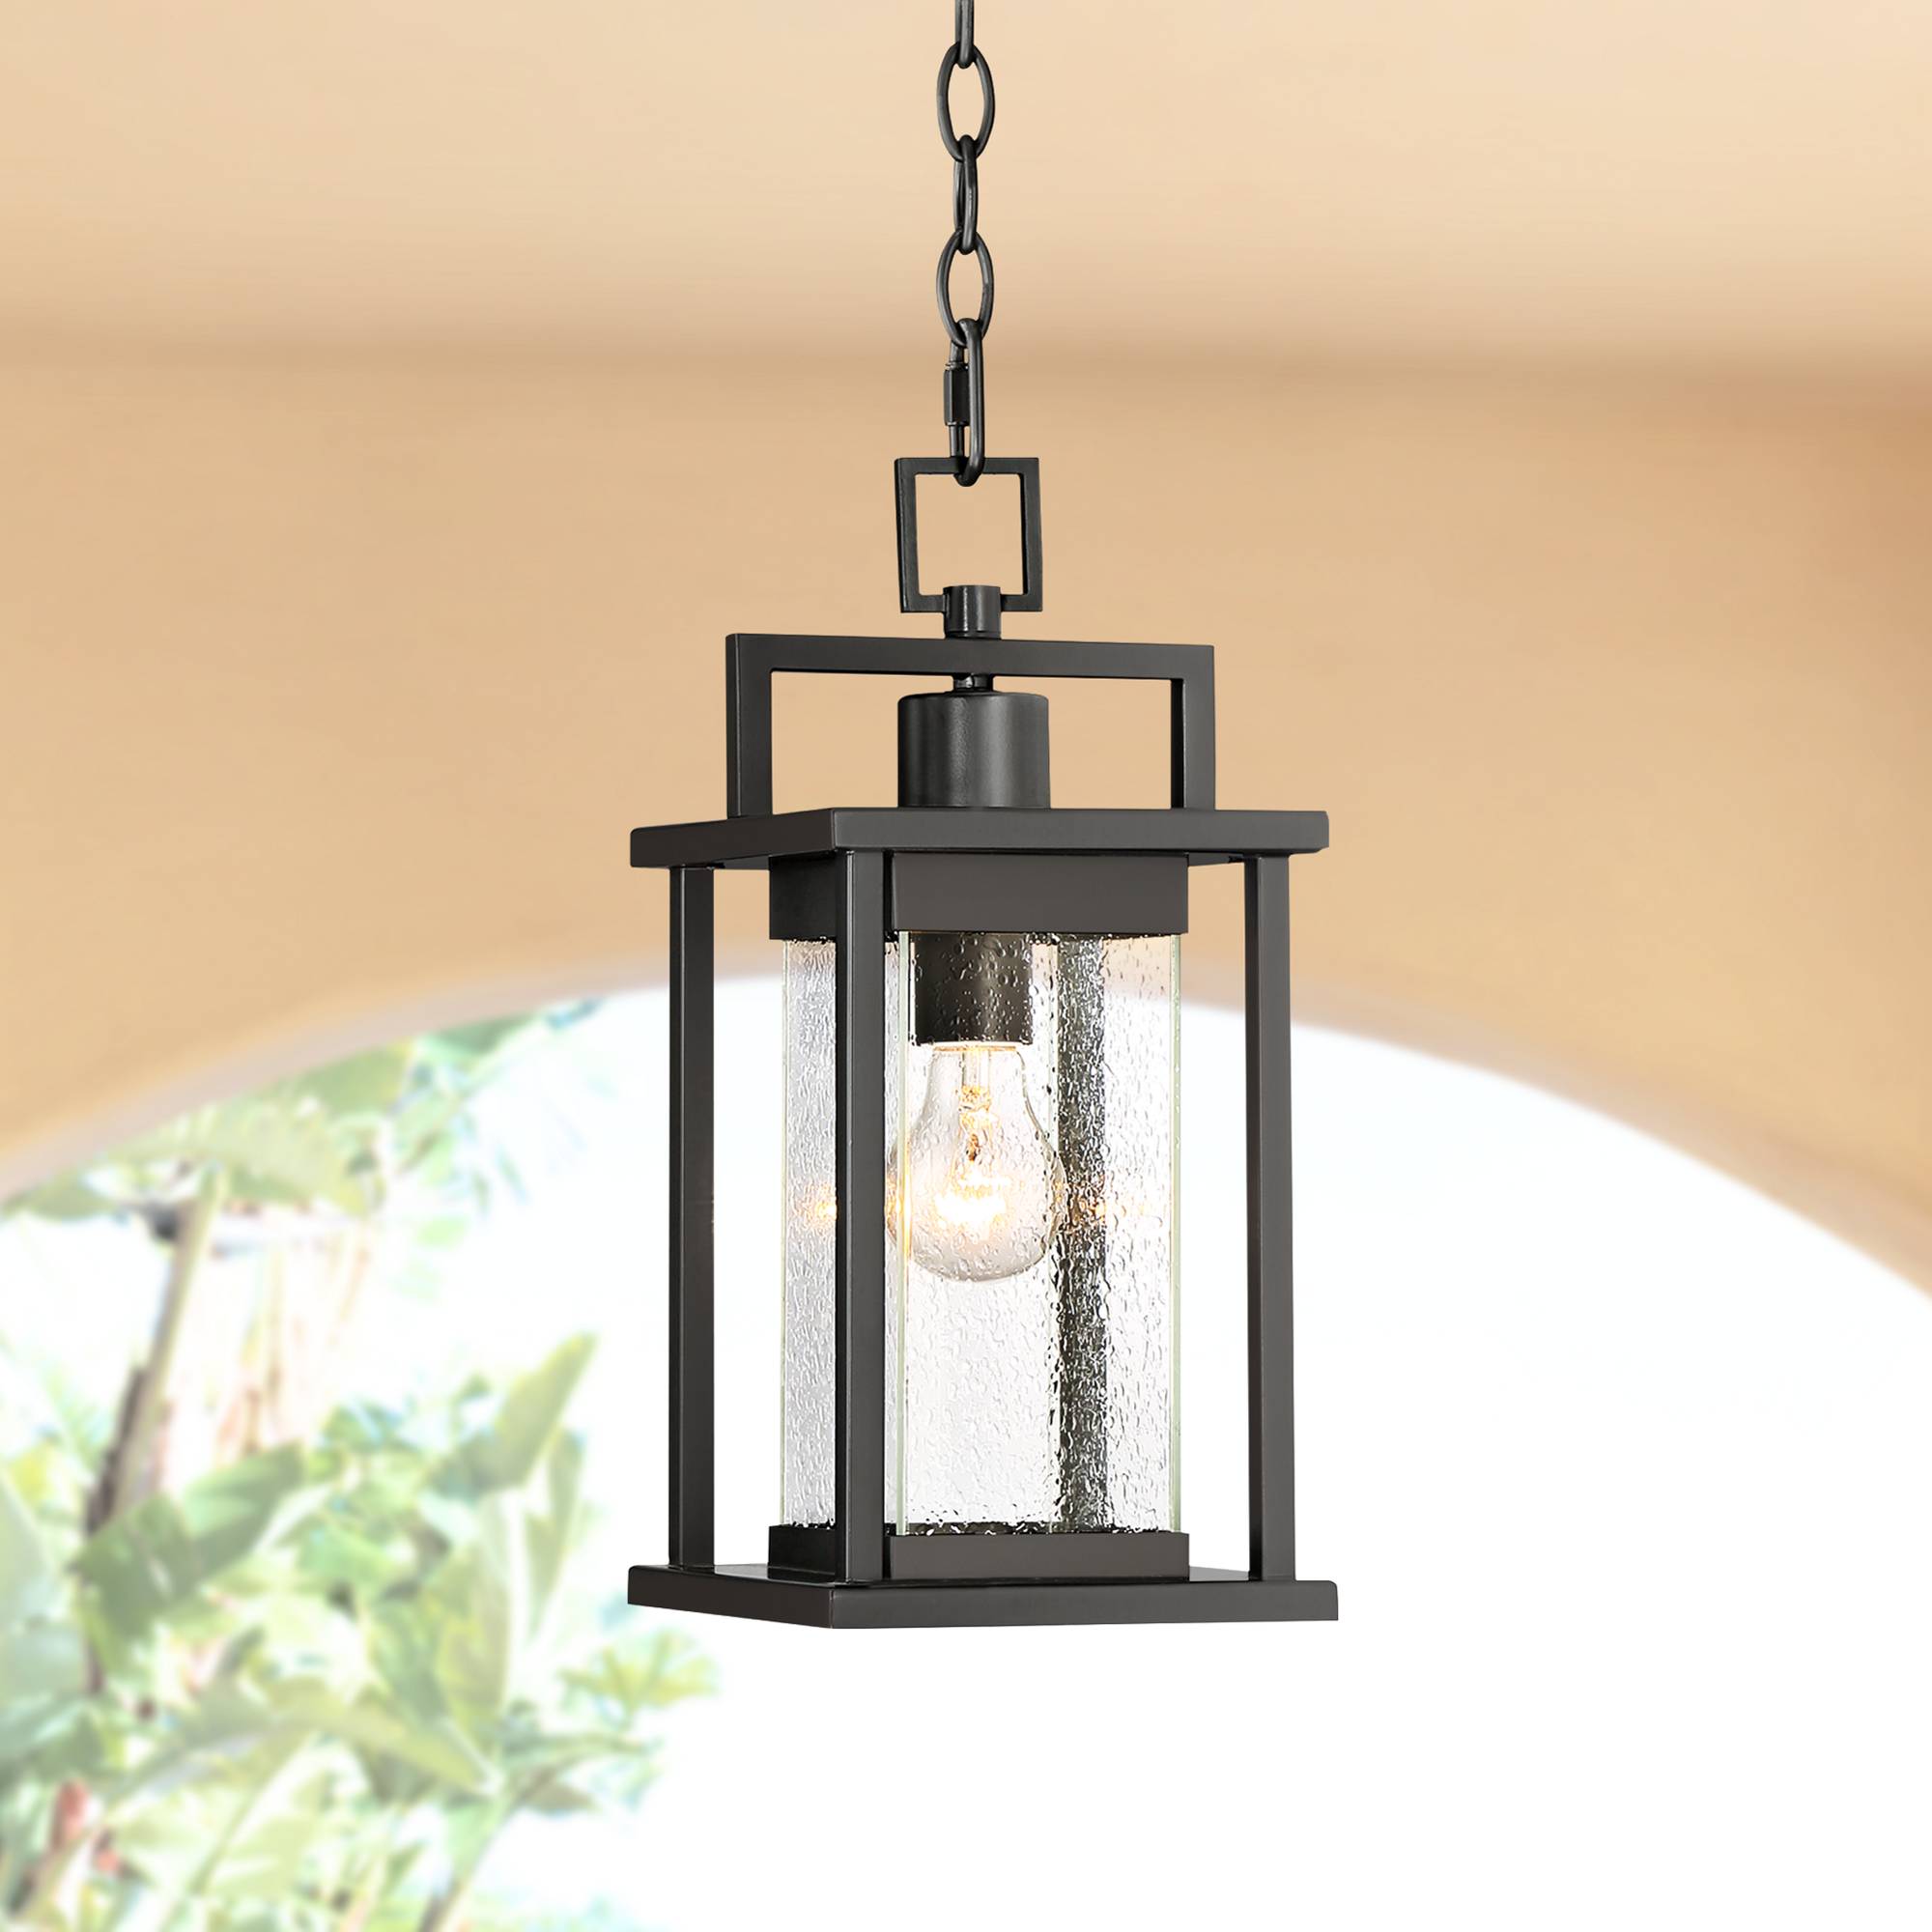 Details About Modern Outdoor Ceiling Light Hanging Painted Dark Gray 15 Exterior Porch Patio